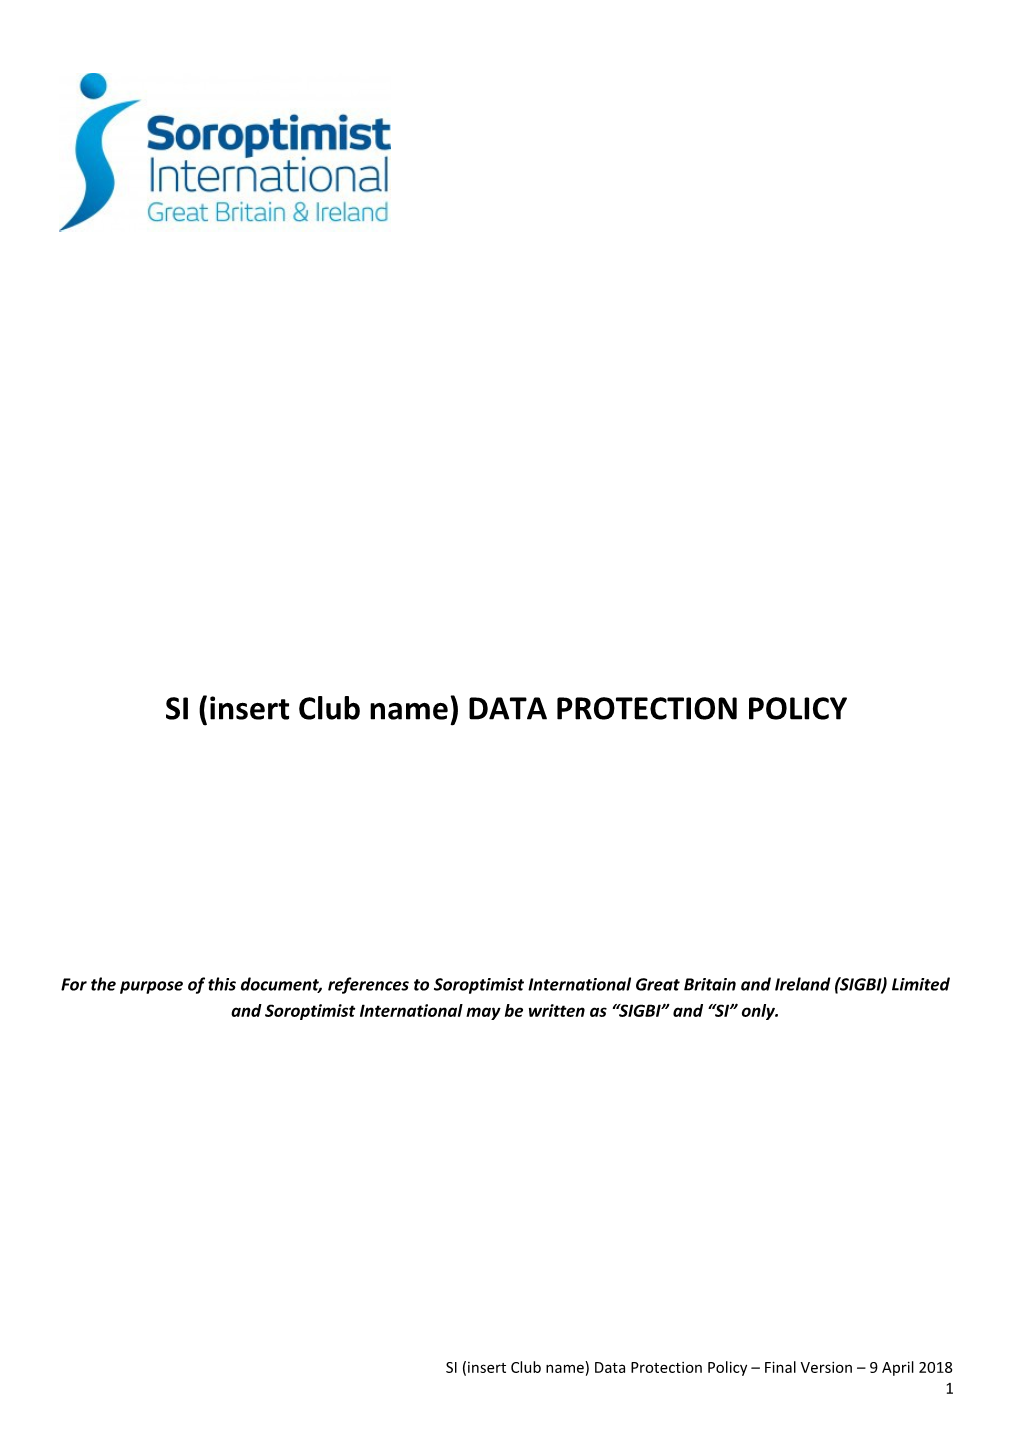 SI (Insert Club Name) DATA PROTECTION POLICY